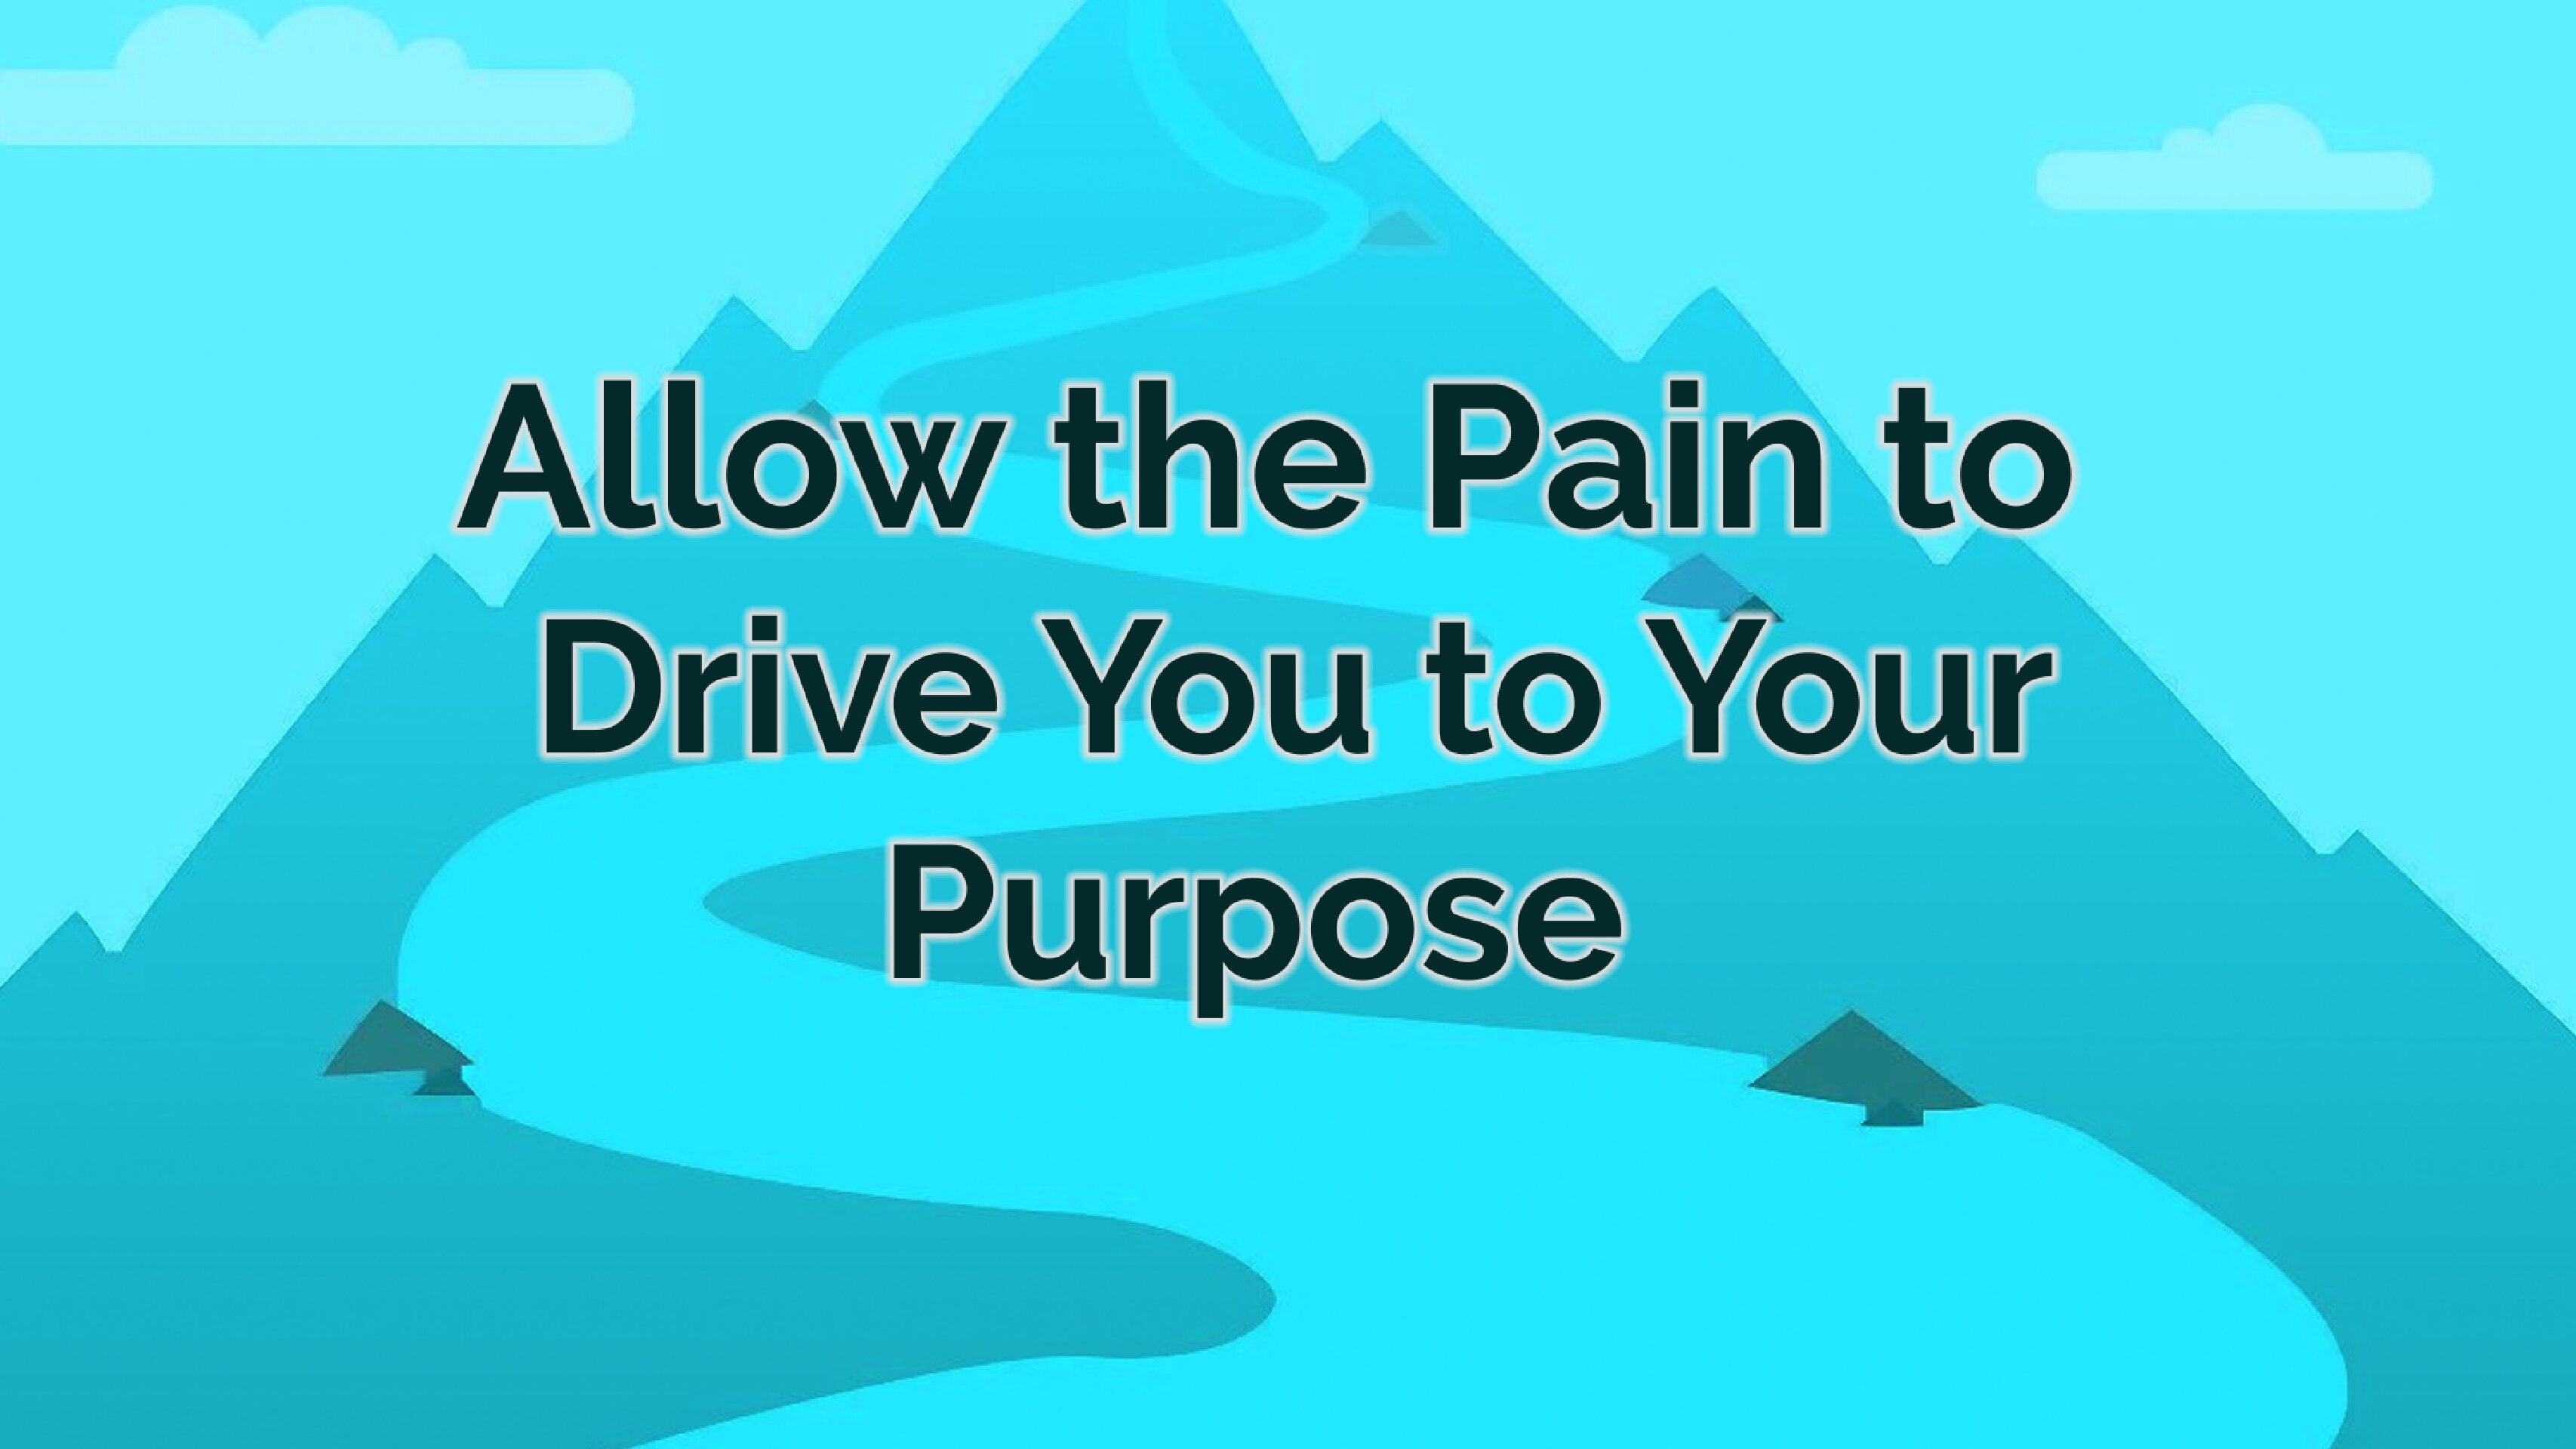 Allow the Pain to Drive You to Your Purpose